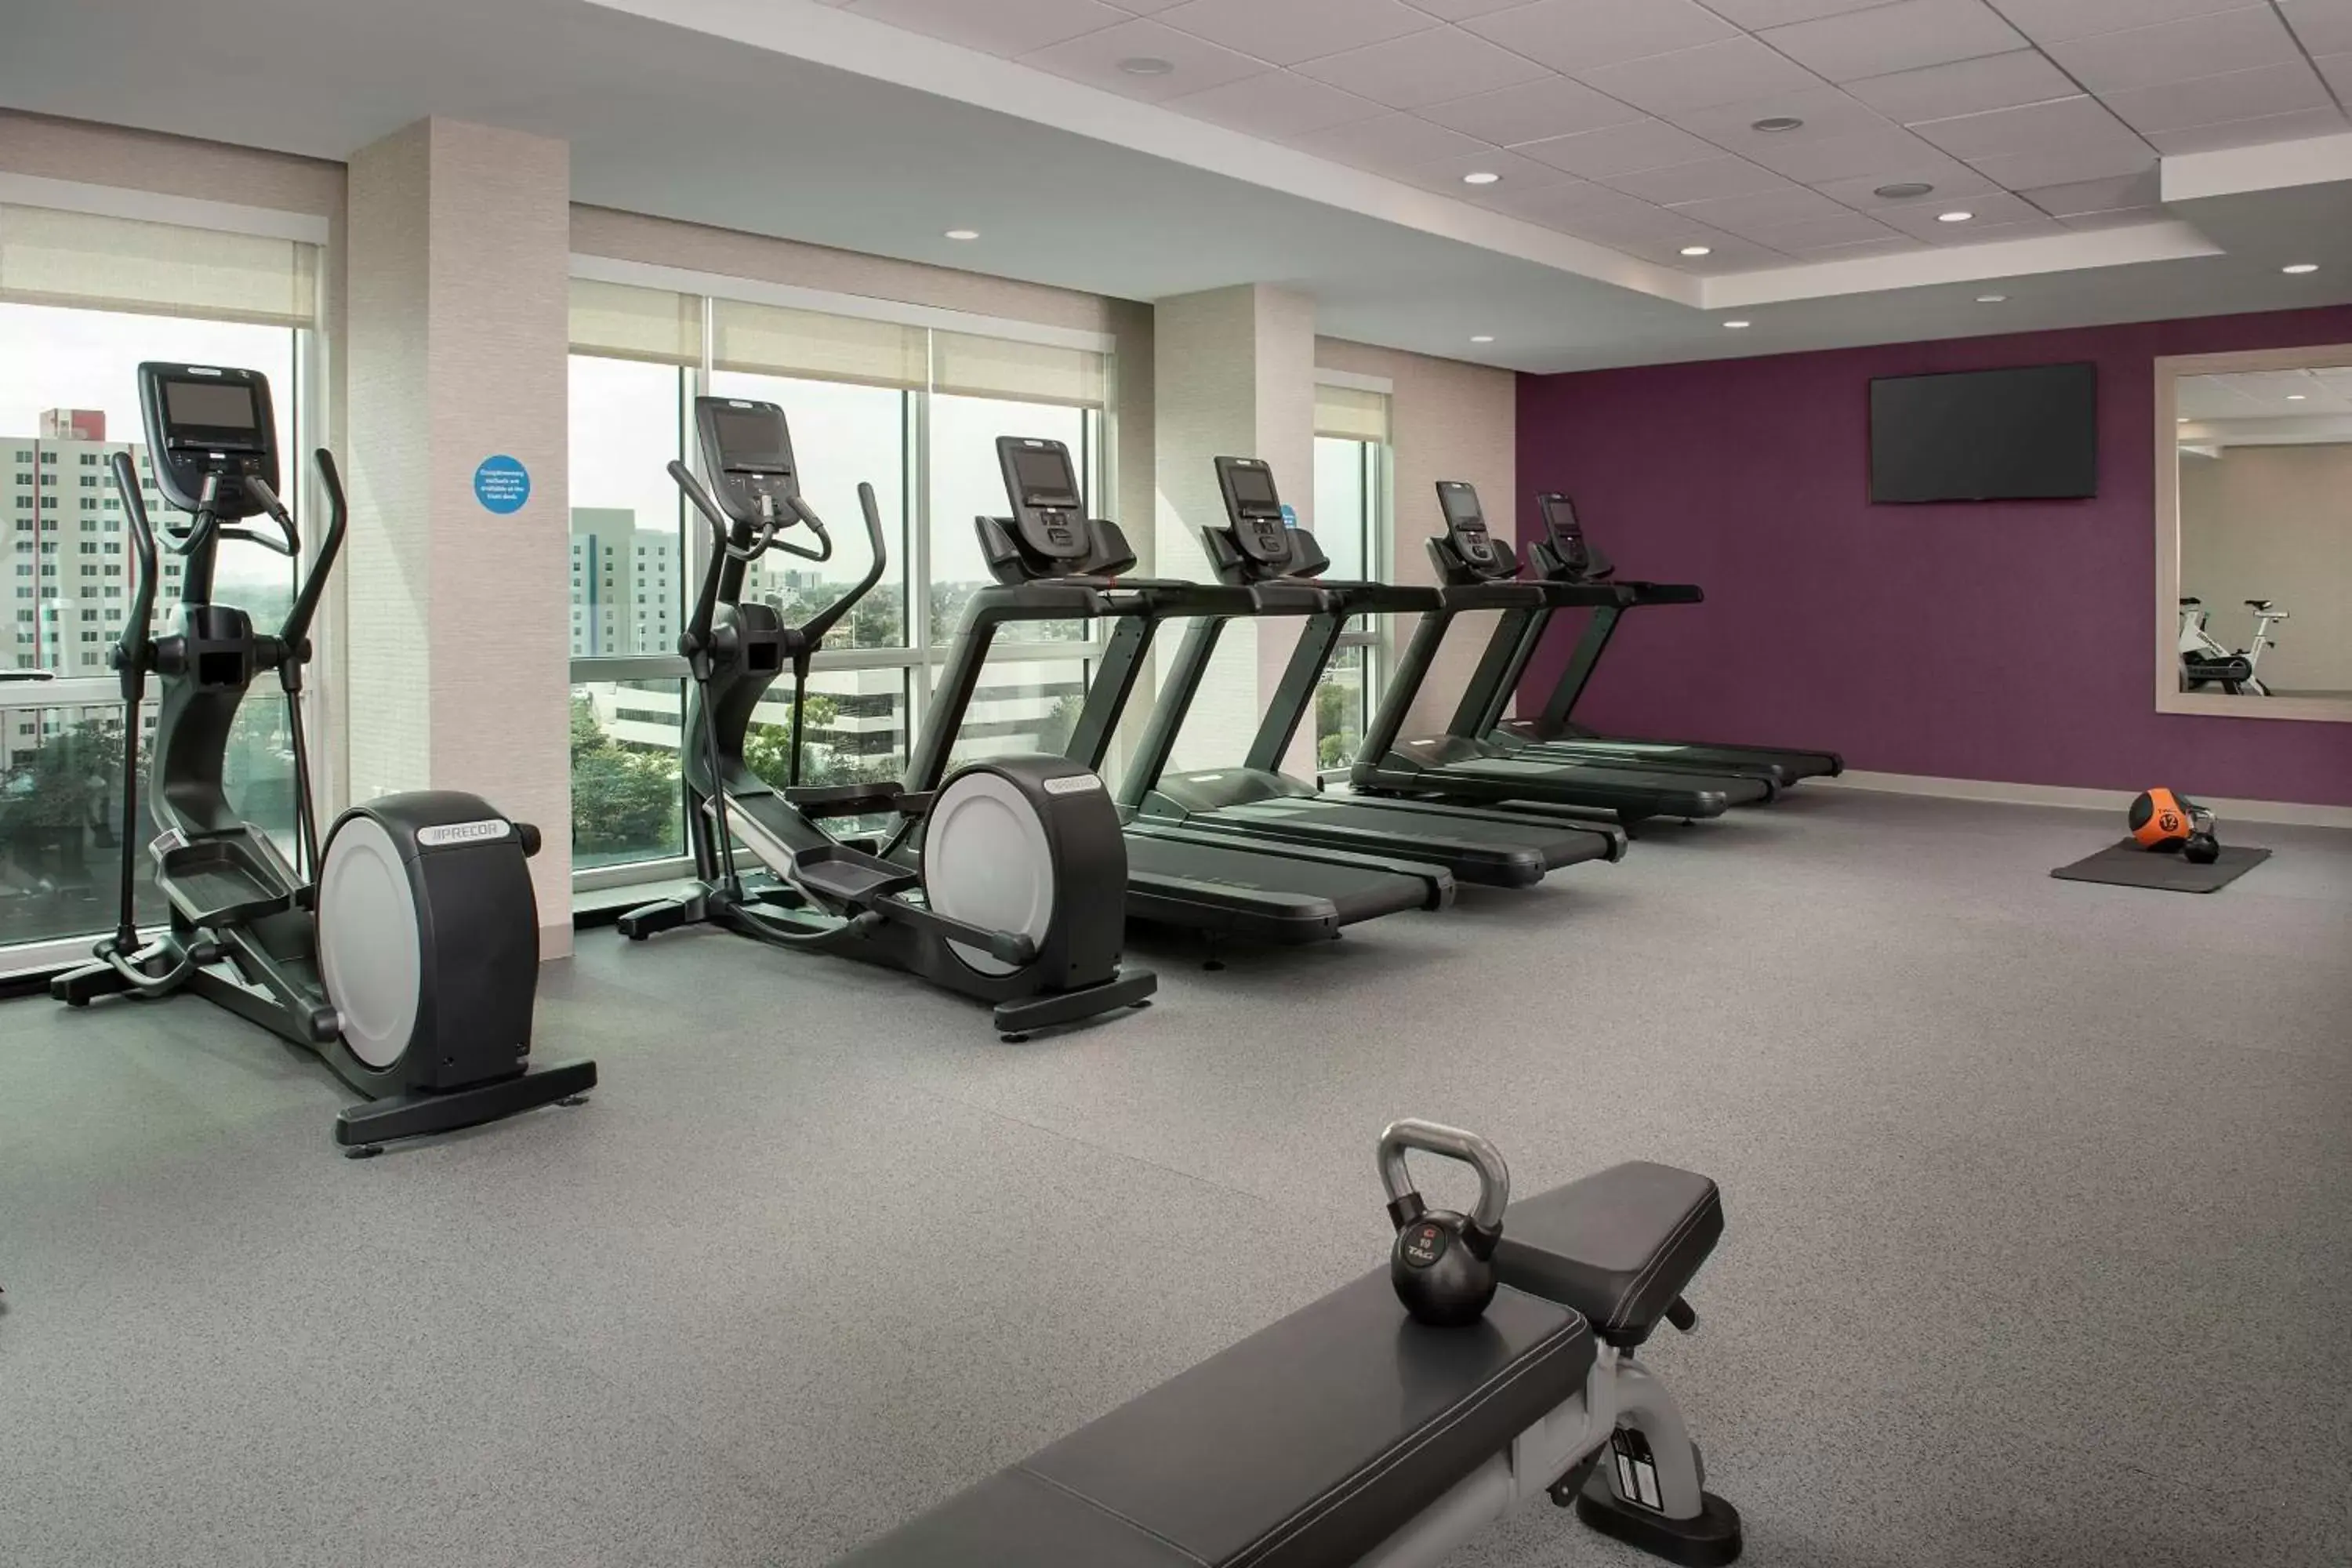 Fitness centre/facilities, Fitness Center/Facilities in Tru By Hilton Miami Airport South Blue Lagoon, Fl